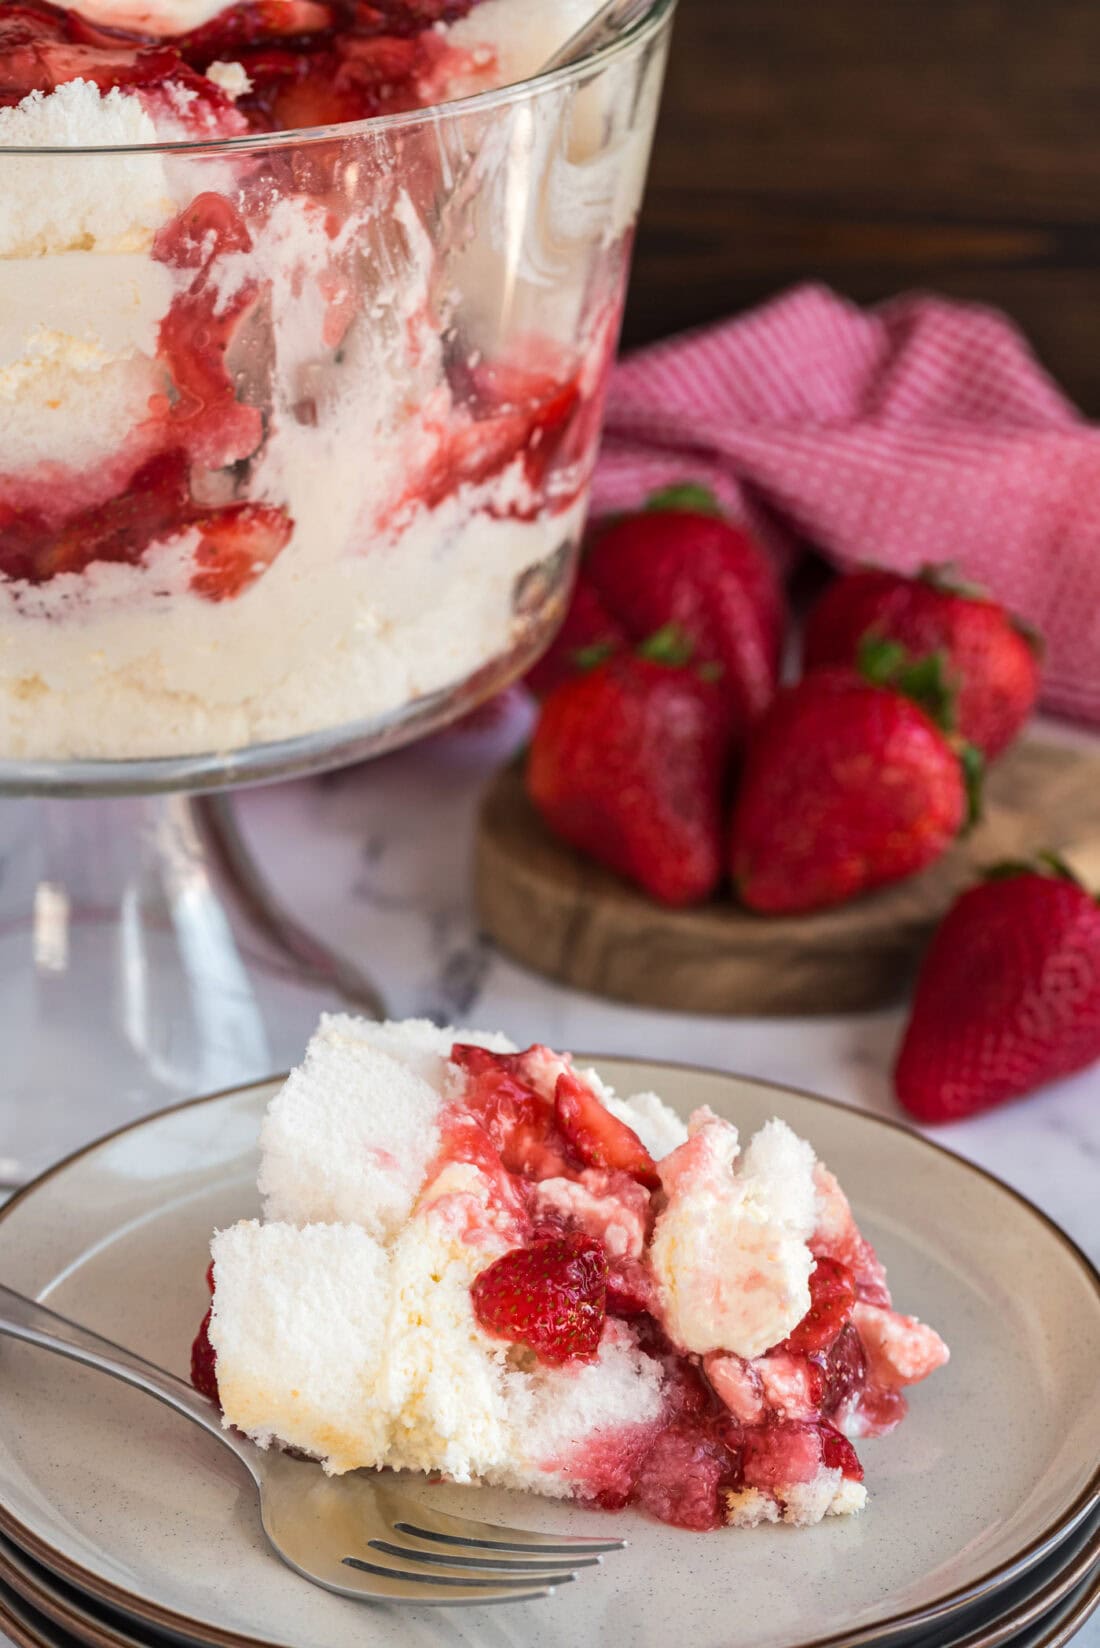 Serving of Strawberry Shortcake Trifle on a plate with the remaining trifle in the background